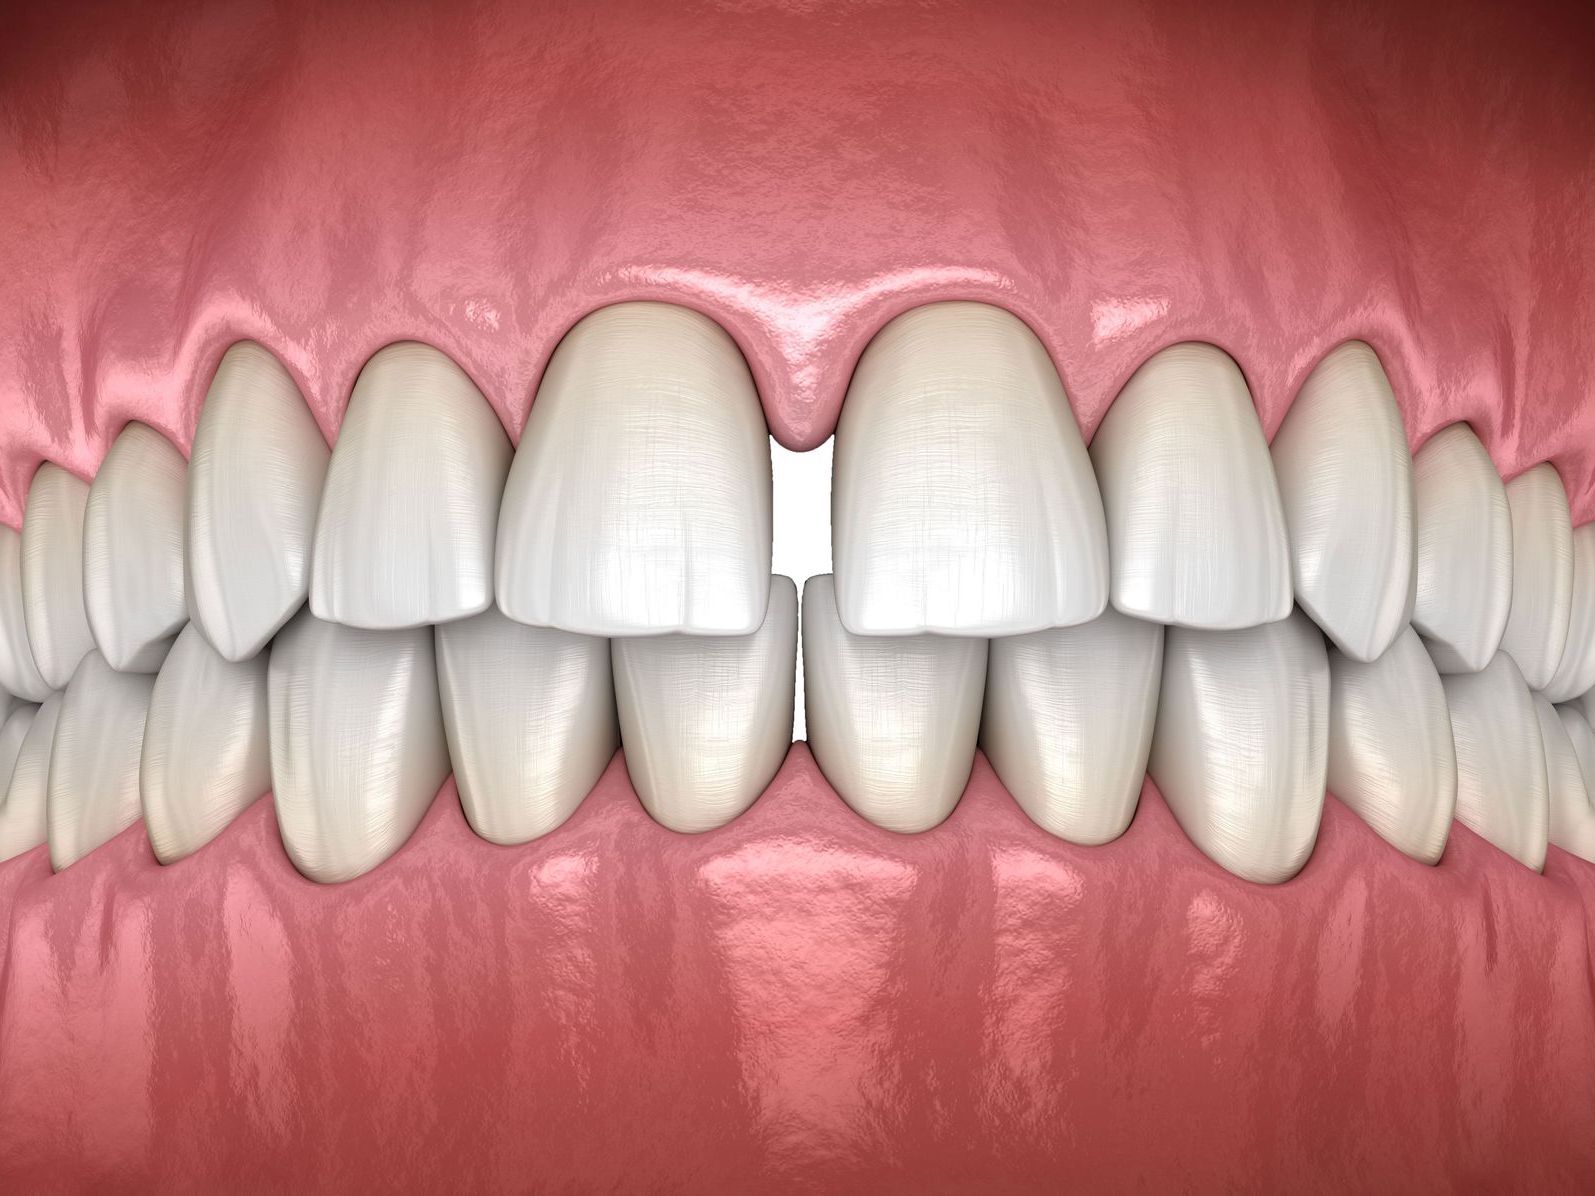 A computer generated image of gapped teeth